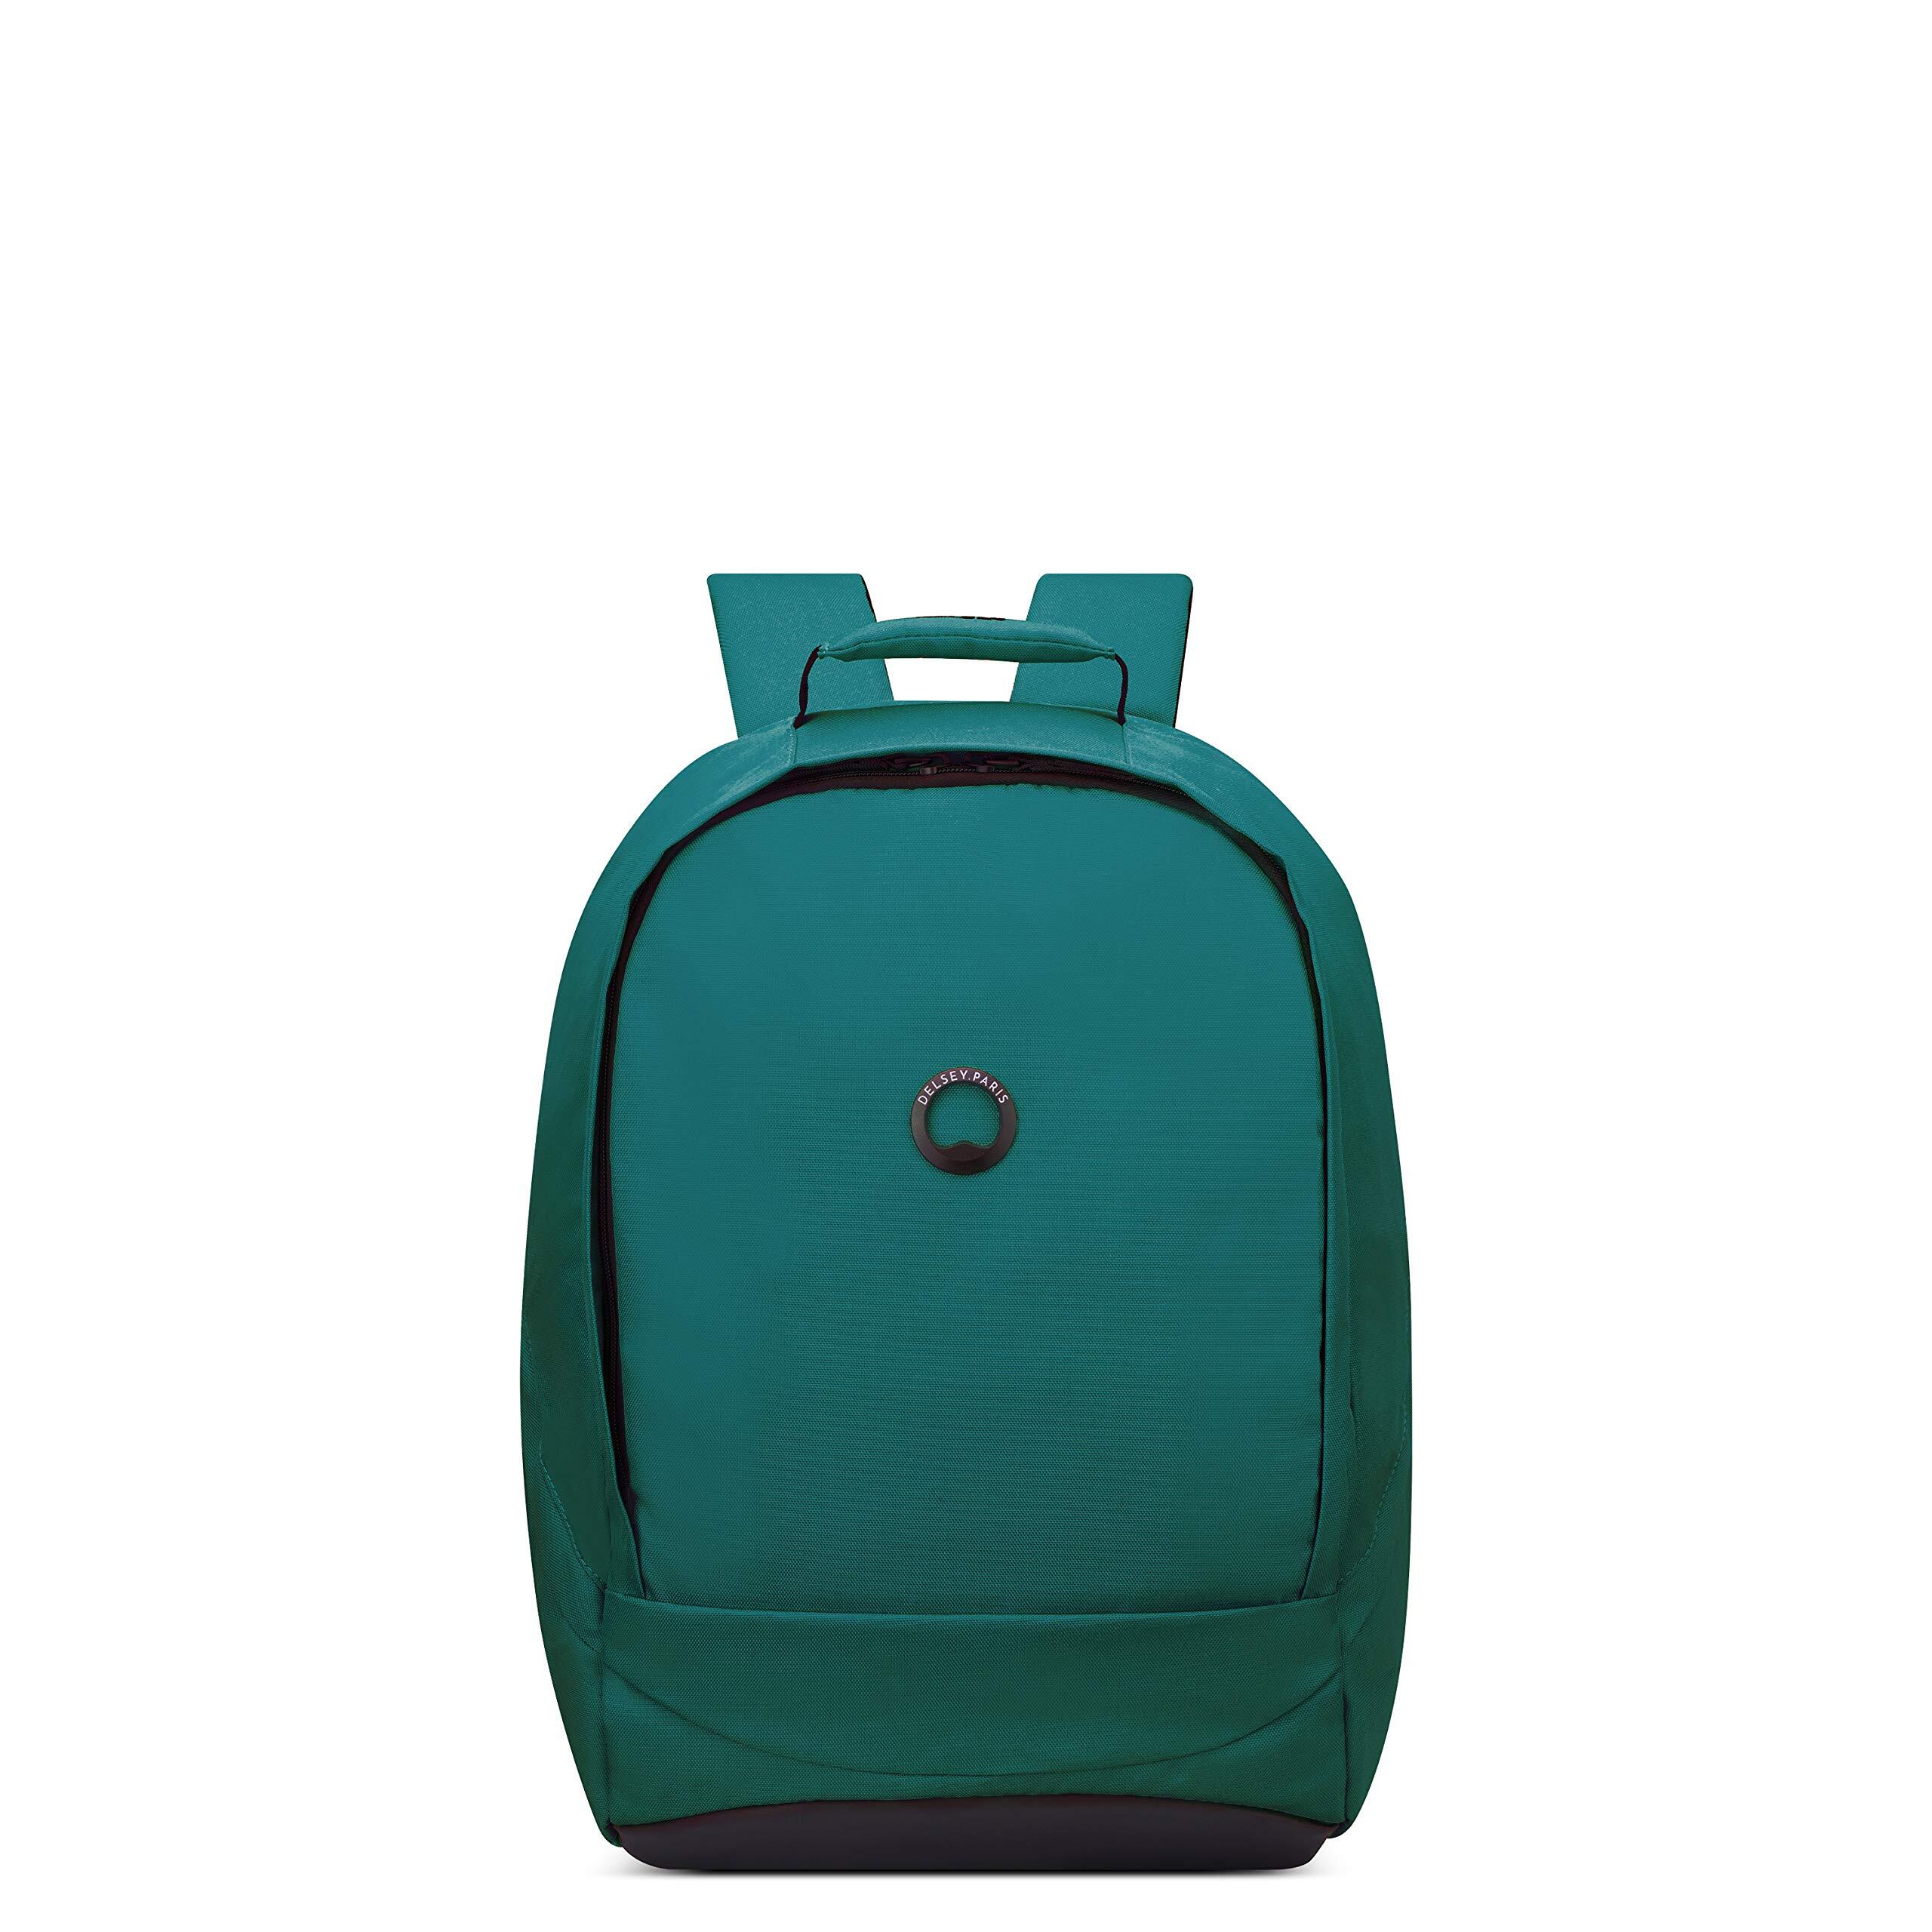 DELSEY Securban Laptop Backpack - Anti Diefstal - 1 Compartment - 15,6 inch - Green